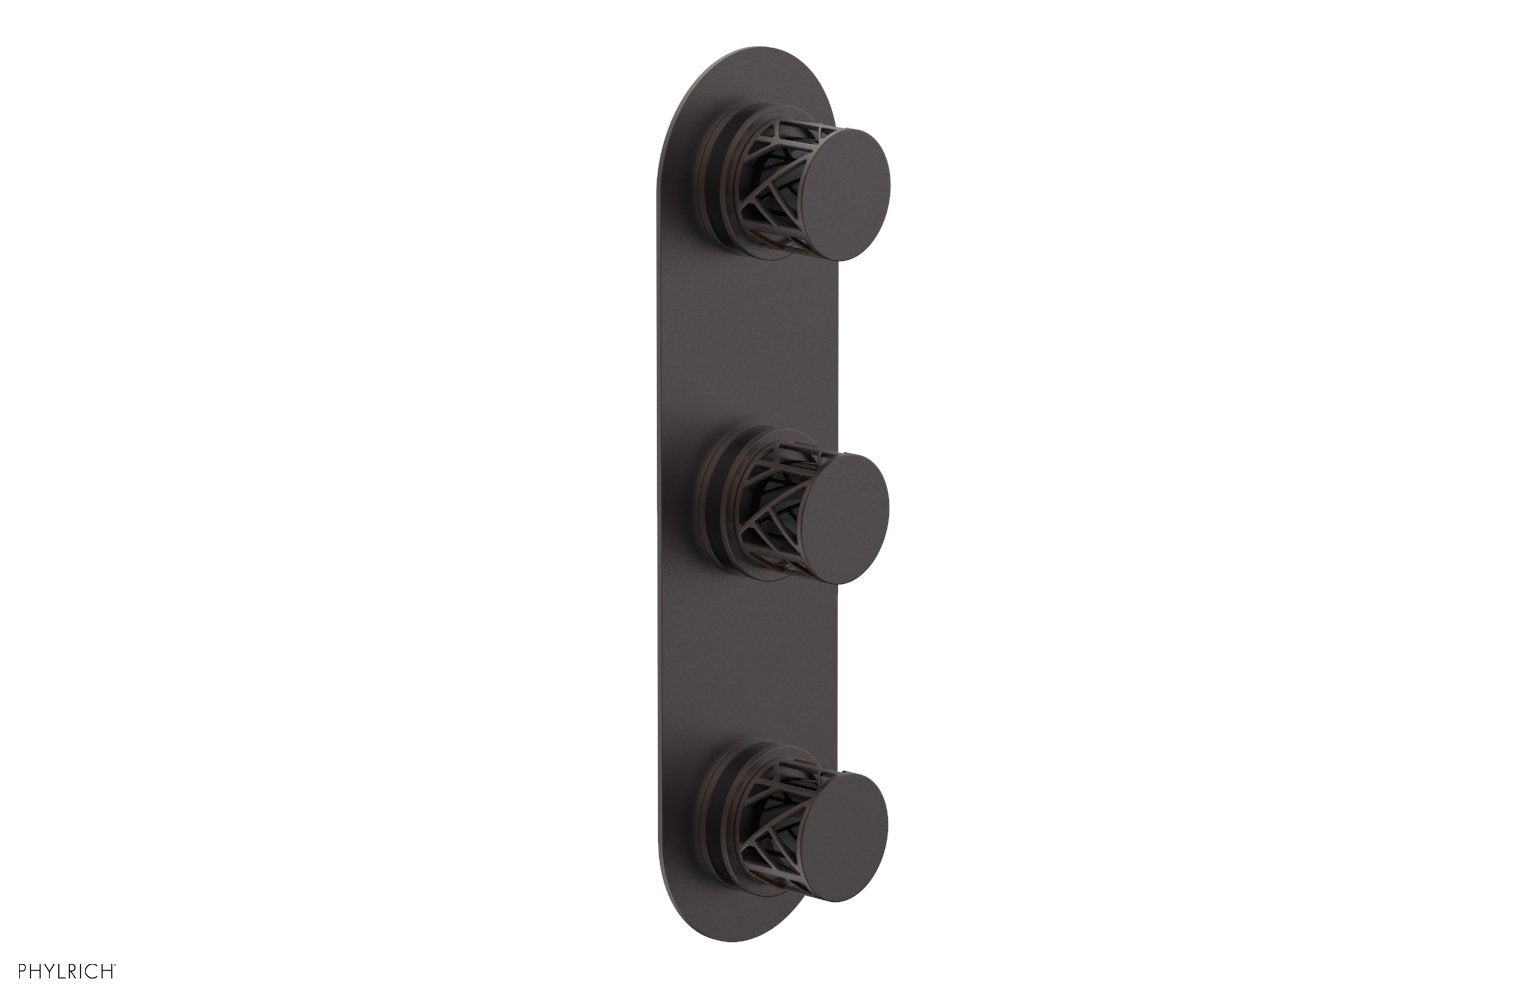 Phylrich JOLIE Thermostatic Valve with Two Volume Control with "Black" Accents